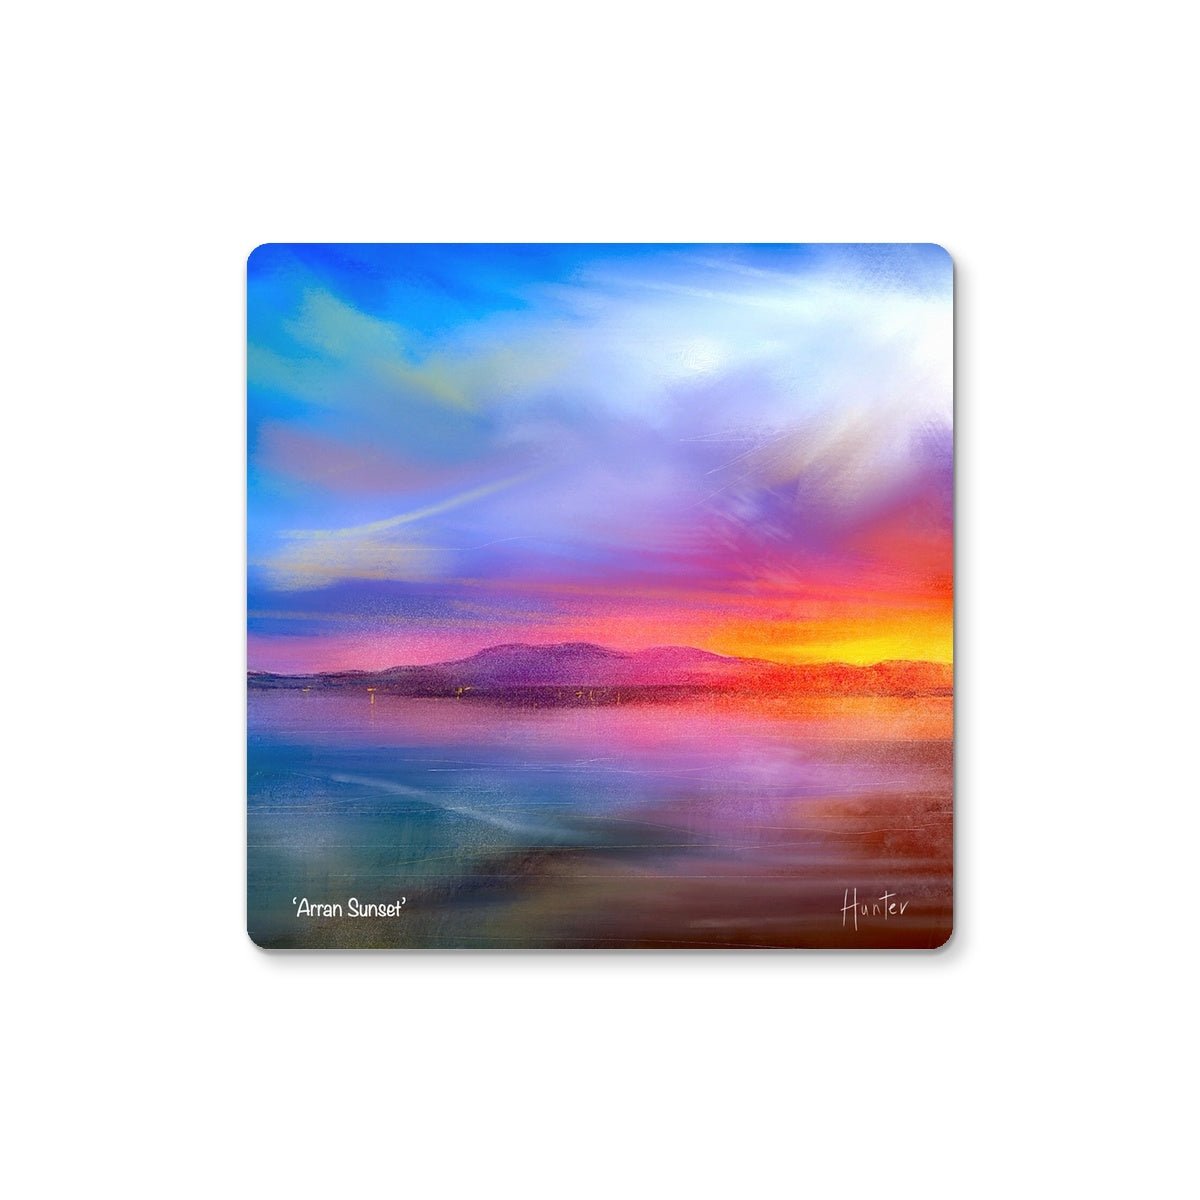 Arran Sunset Art Gifts Coaster-Coasters-Arran Art Gallery-6 Coasters-Paintings, Prints, Homeware, Art Gifts From Scotland By Scottish Artist Kevin Hunter